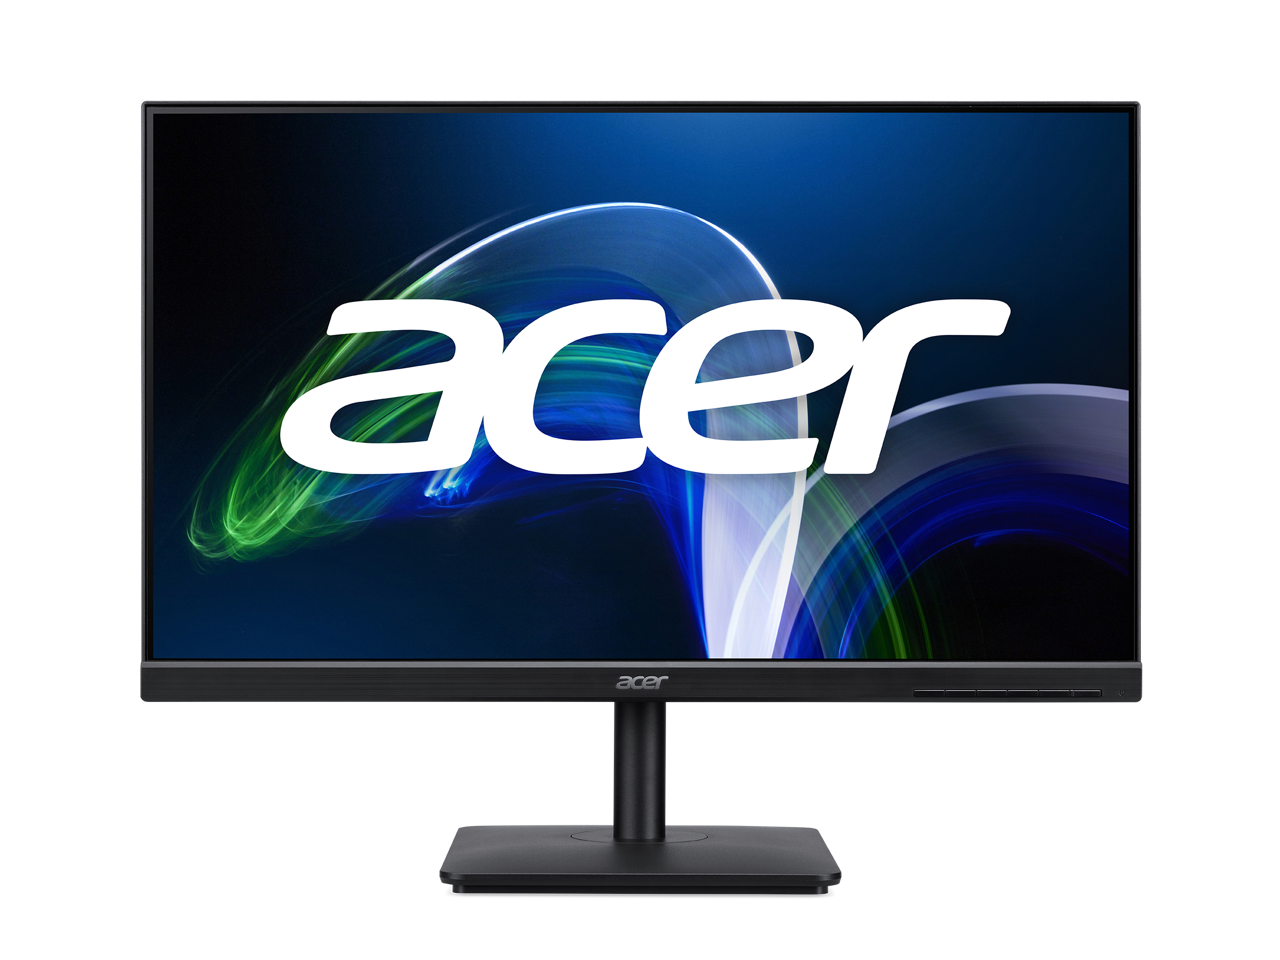 Acer VA241Y 24" (23.8" Viewable) Full HD LED LCD Monitor - 16:9 - Black - Vertical Alignment (VA) - 1920 x 1080 - 16.7 Million Colors - 250 Nit - 4 ms - 75 Hz Refresh Rate - HDMI - VGA - image 1 of 9